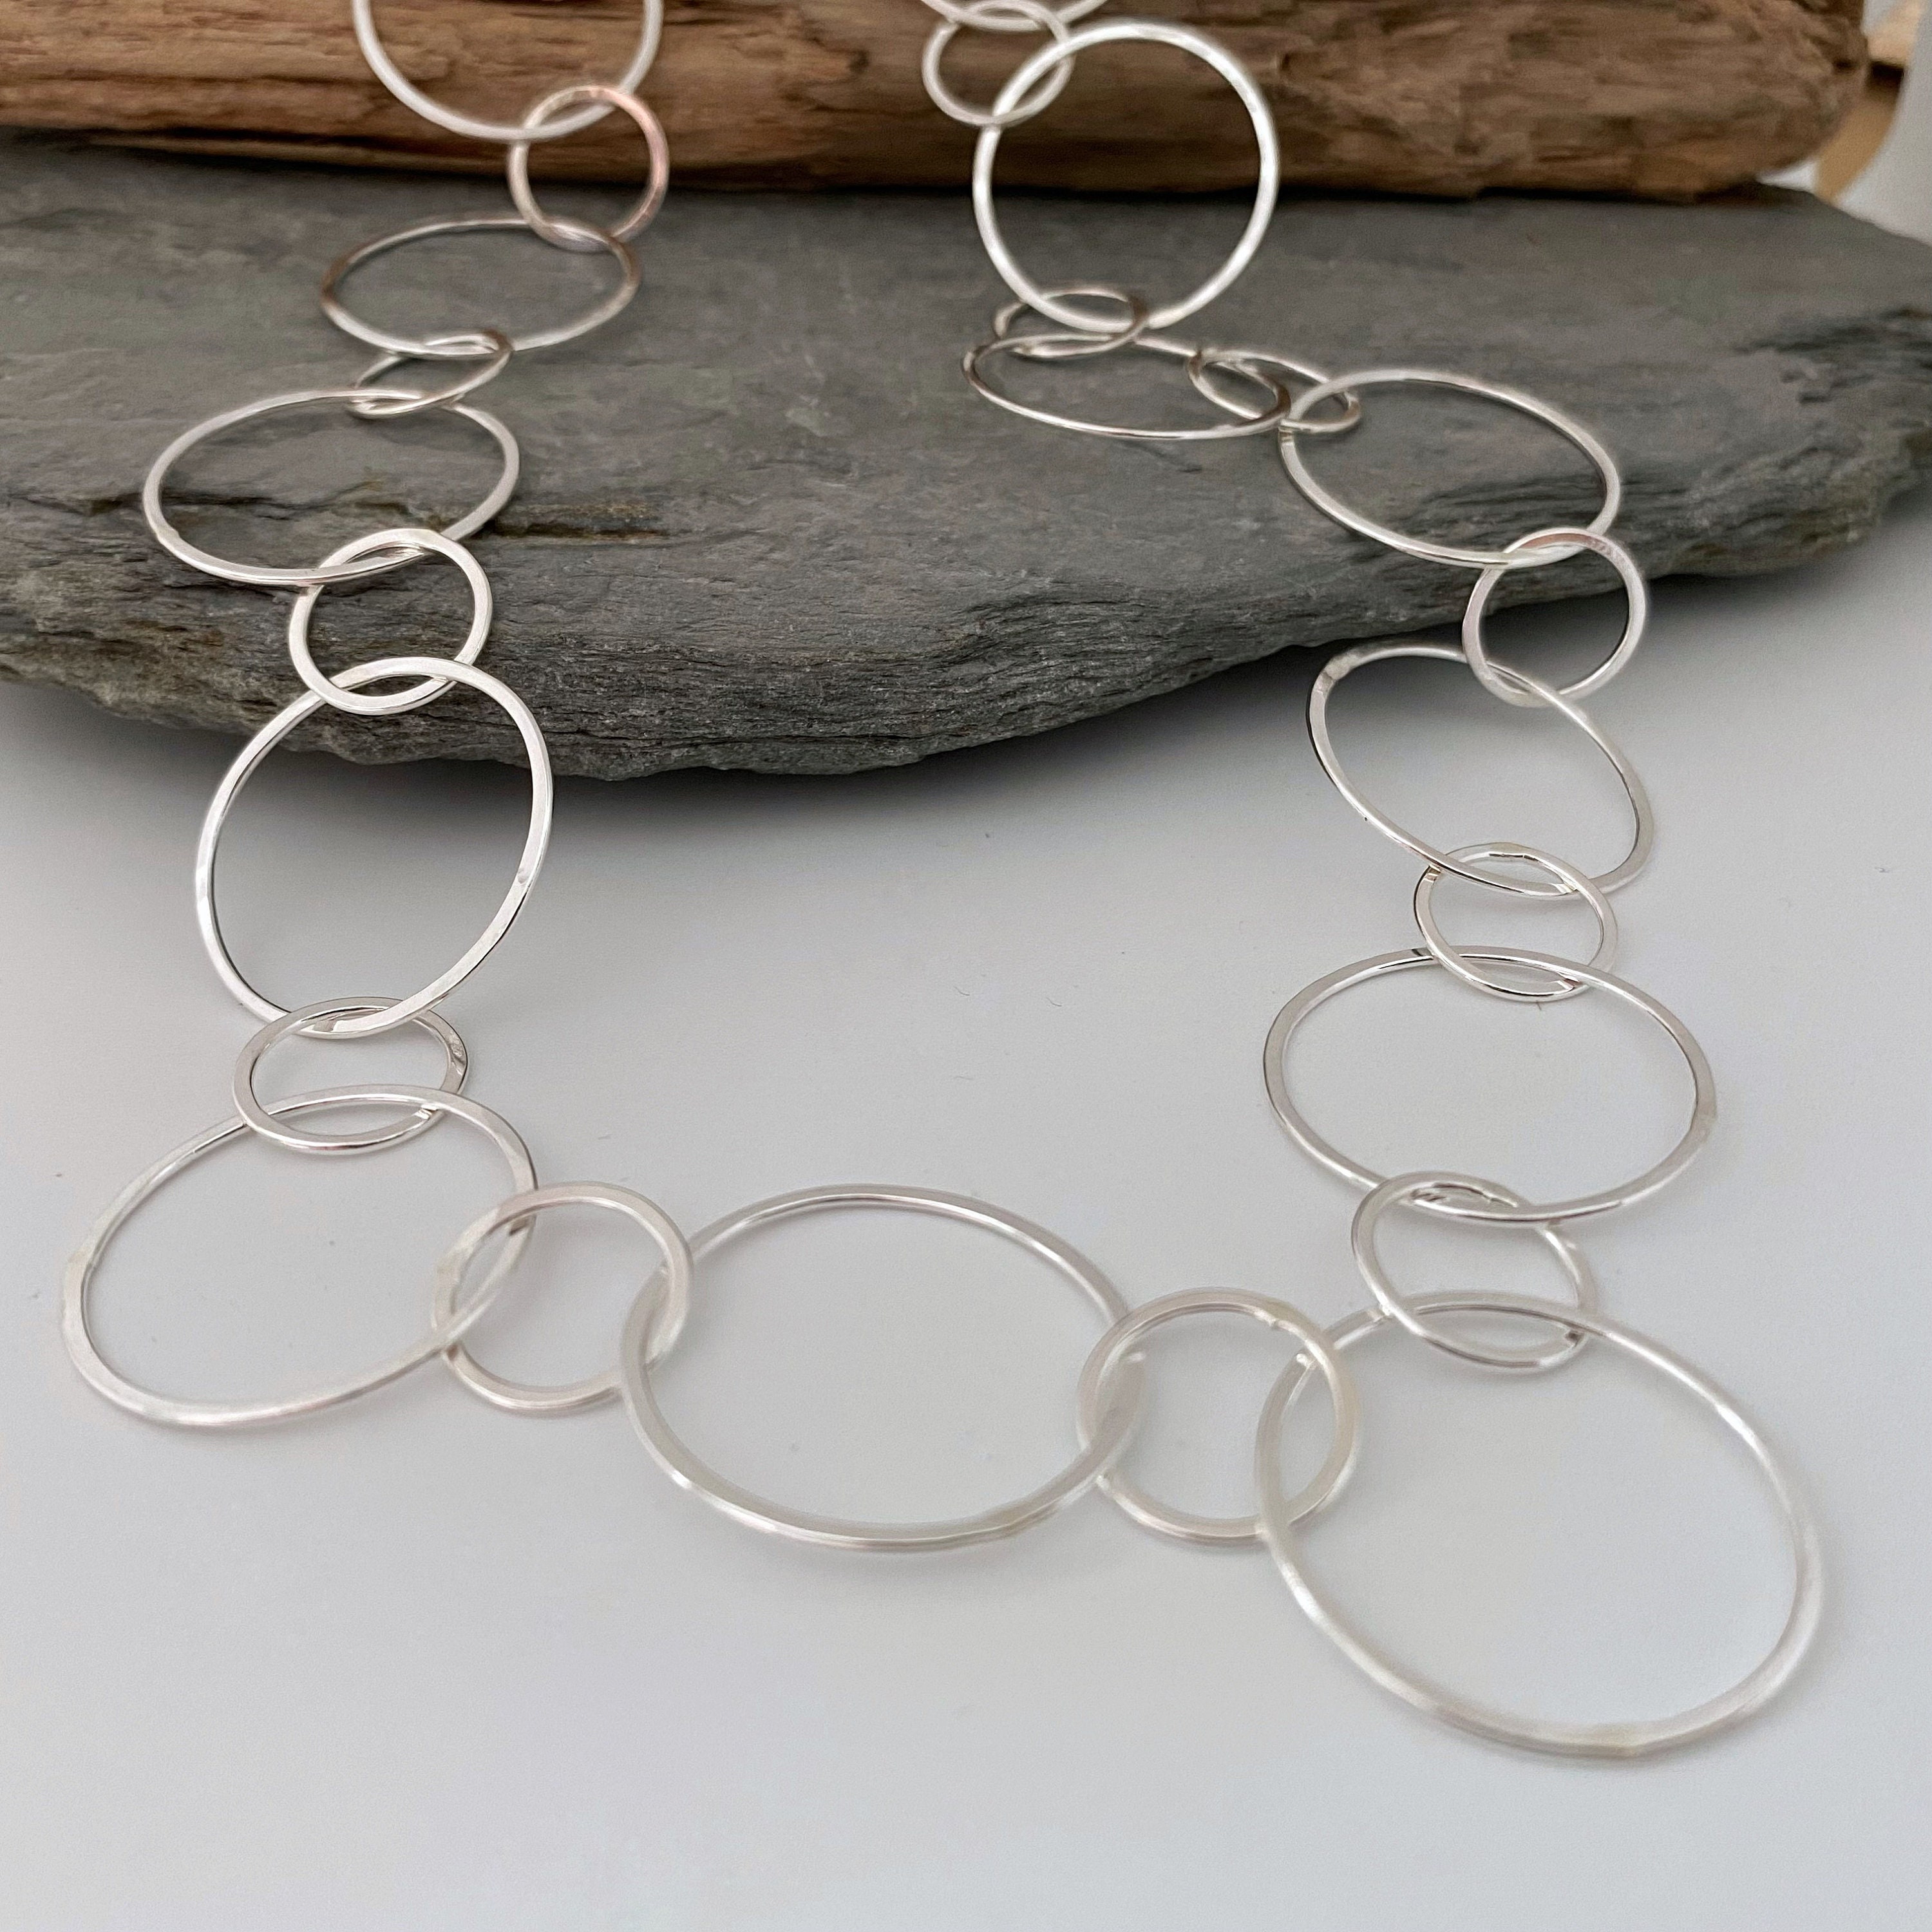 Silver Chain Necklace With Large Round Links, Links Hammered Silver Necklace, Solid